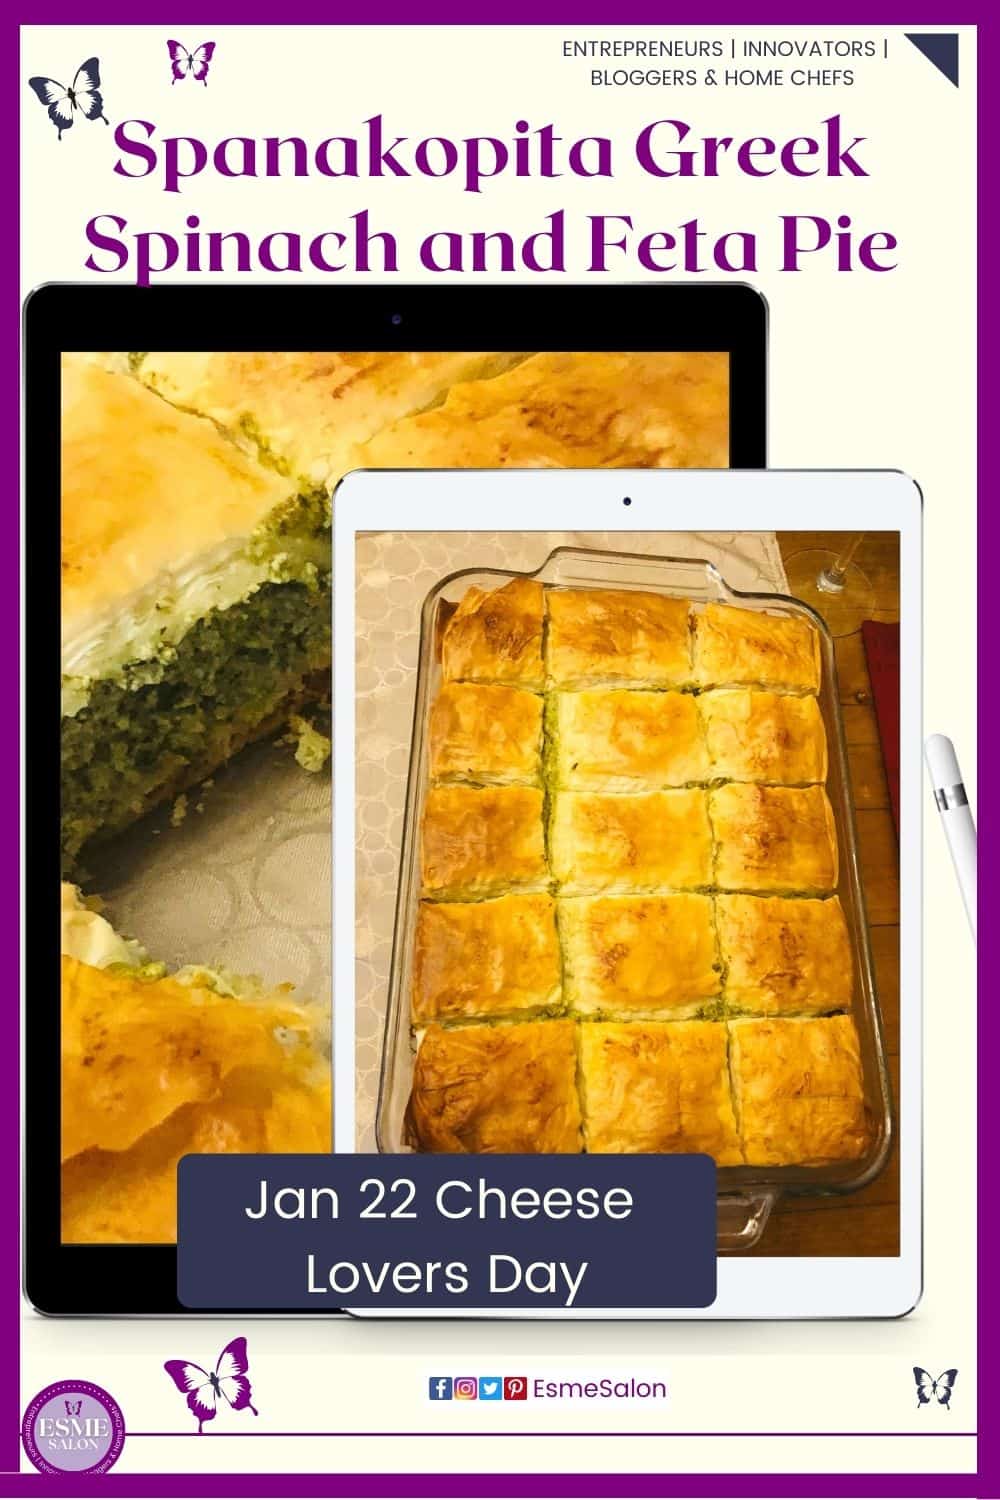 an image of Spanakopita Greek Spinach and Feta Pie